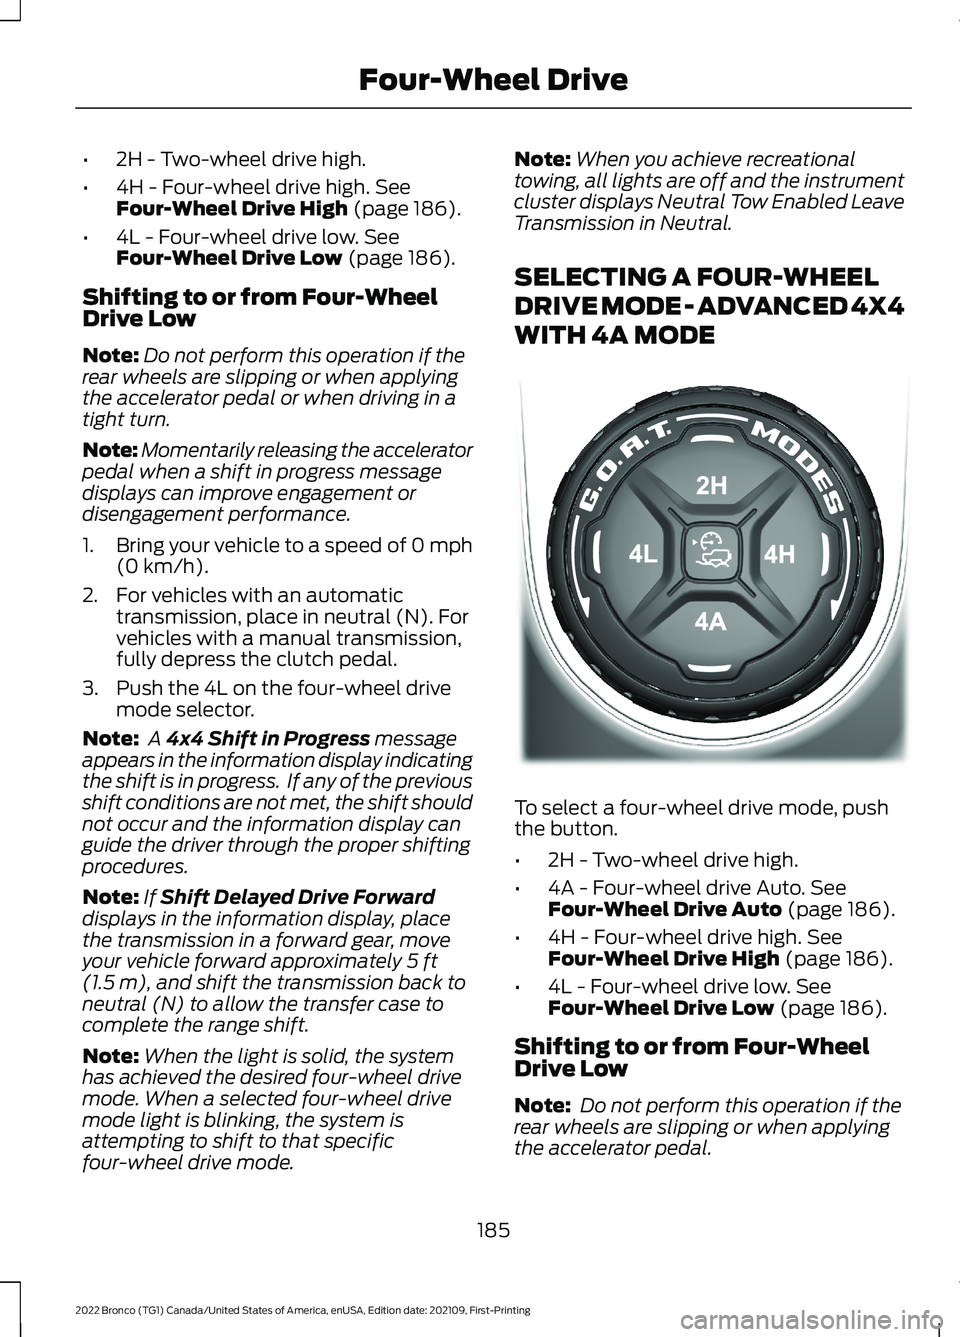 FORD BRONCO 2022 Service Manual •2H - Two-wheel drive high.
•4H - Four-wheel drive high. SeeFour-Wheel Drive High (page 186).
•4L - Four-wheel drive low. SeeFour-Wheel Drive Low (page 186).
Shifting to or from Four-WheelDrive 